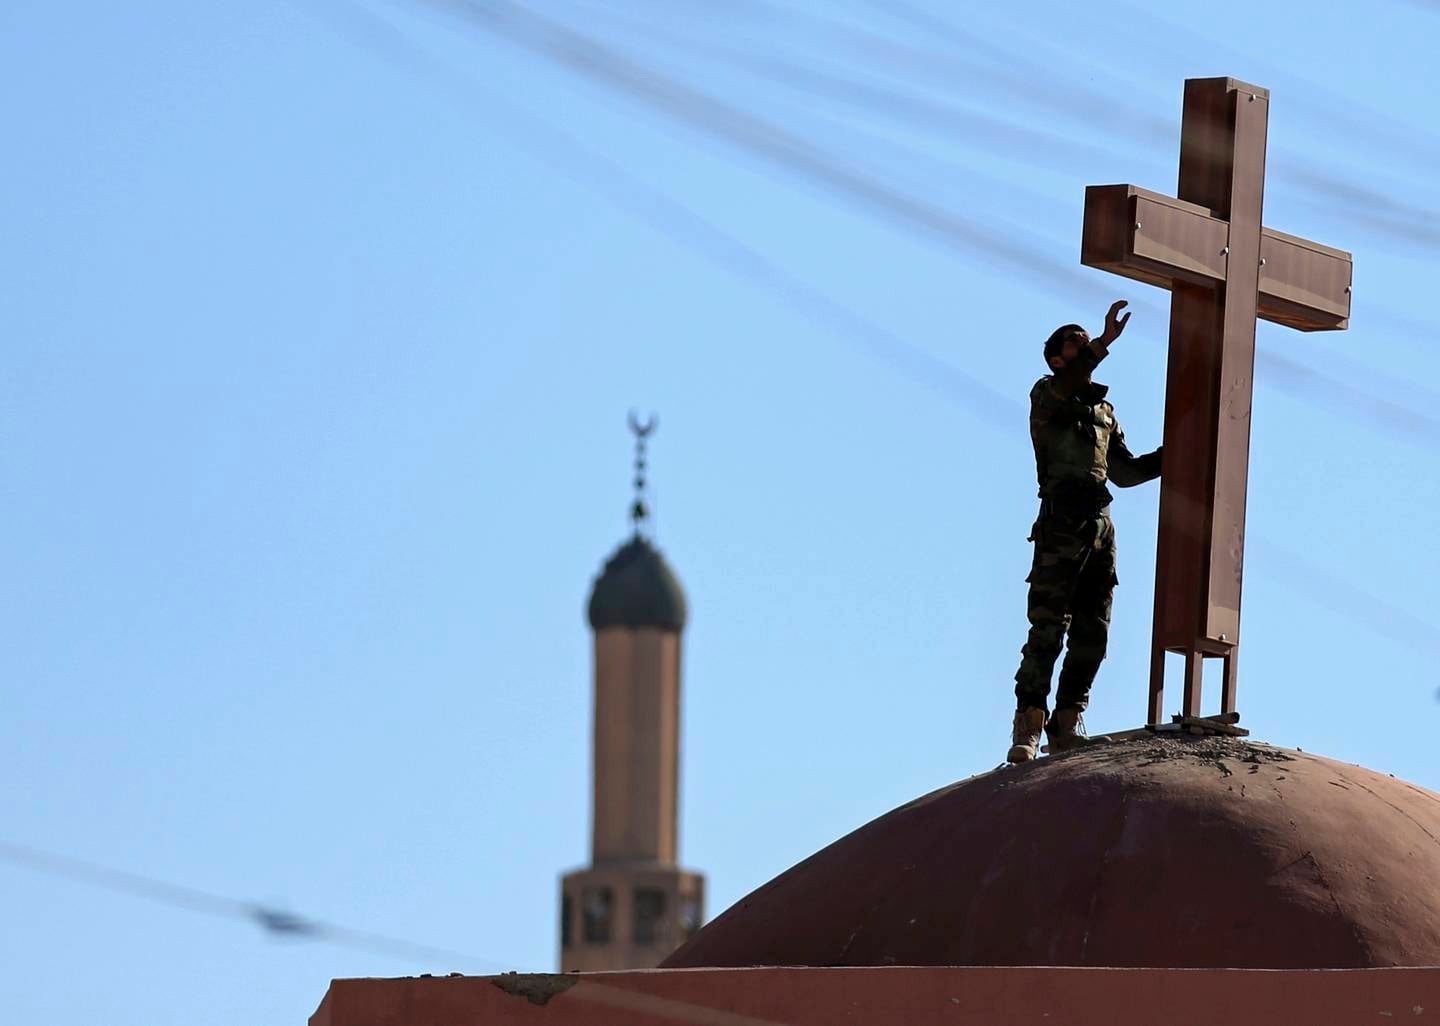 An Iraqi Kurdish Muslim Peshmerga fighter sets a cross on top of a church, which was damaged by Islamic State fighters during their occupation of Bashiqa, east of Mosul, Iraq, Wednesday, Dec. 7, 2016. A senior Iraqi commander said Wednesday that special forces captured a new neighborhood from Islamic State militants in eastern Mosul, the latest gain in a massive government military operation now in its seventh week. (AP Photo/Hadi Mizban)